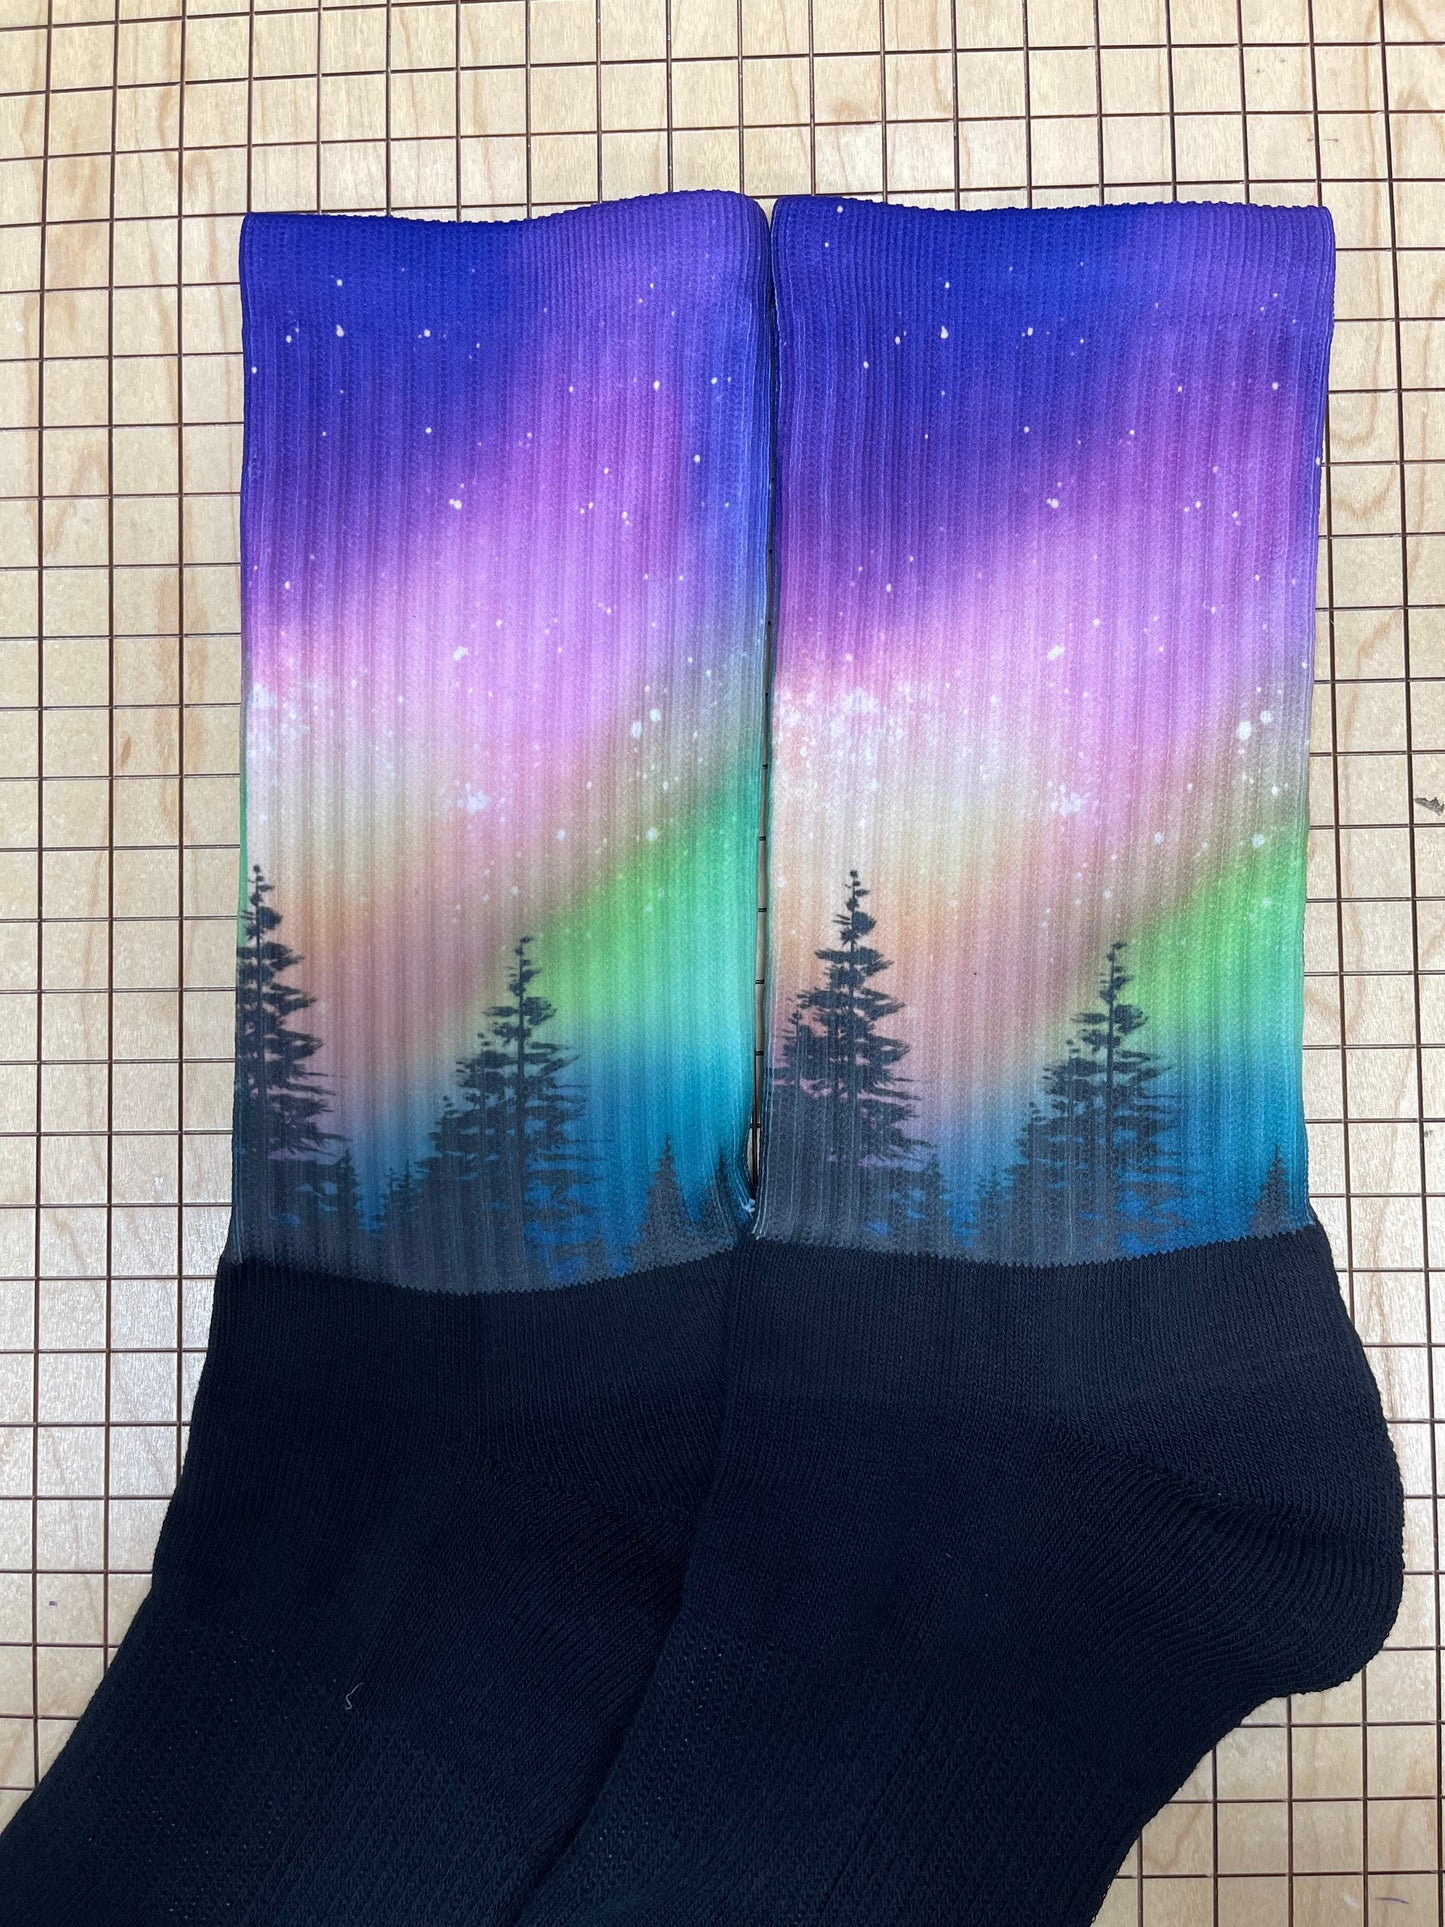 Northern lights  athletic socks. Handcrafted in the USA.